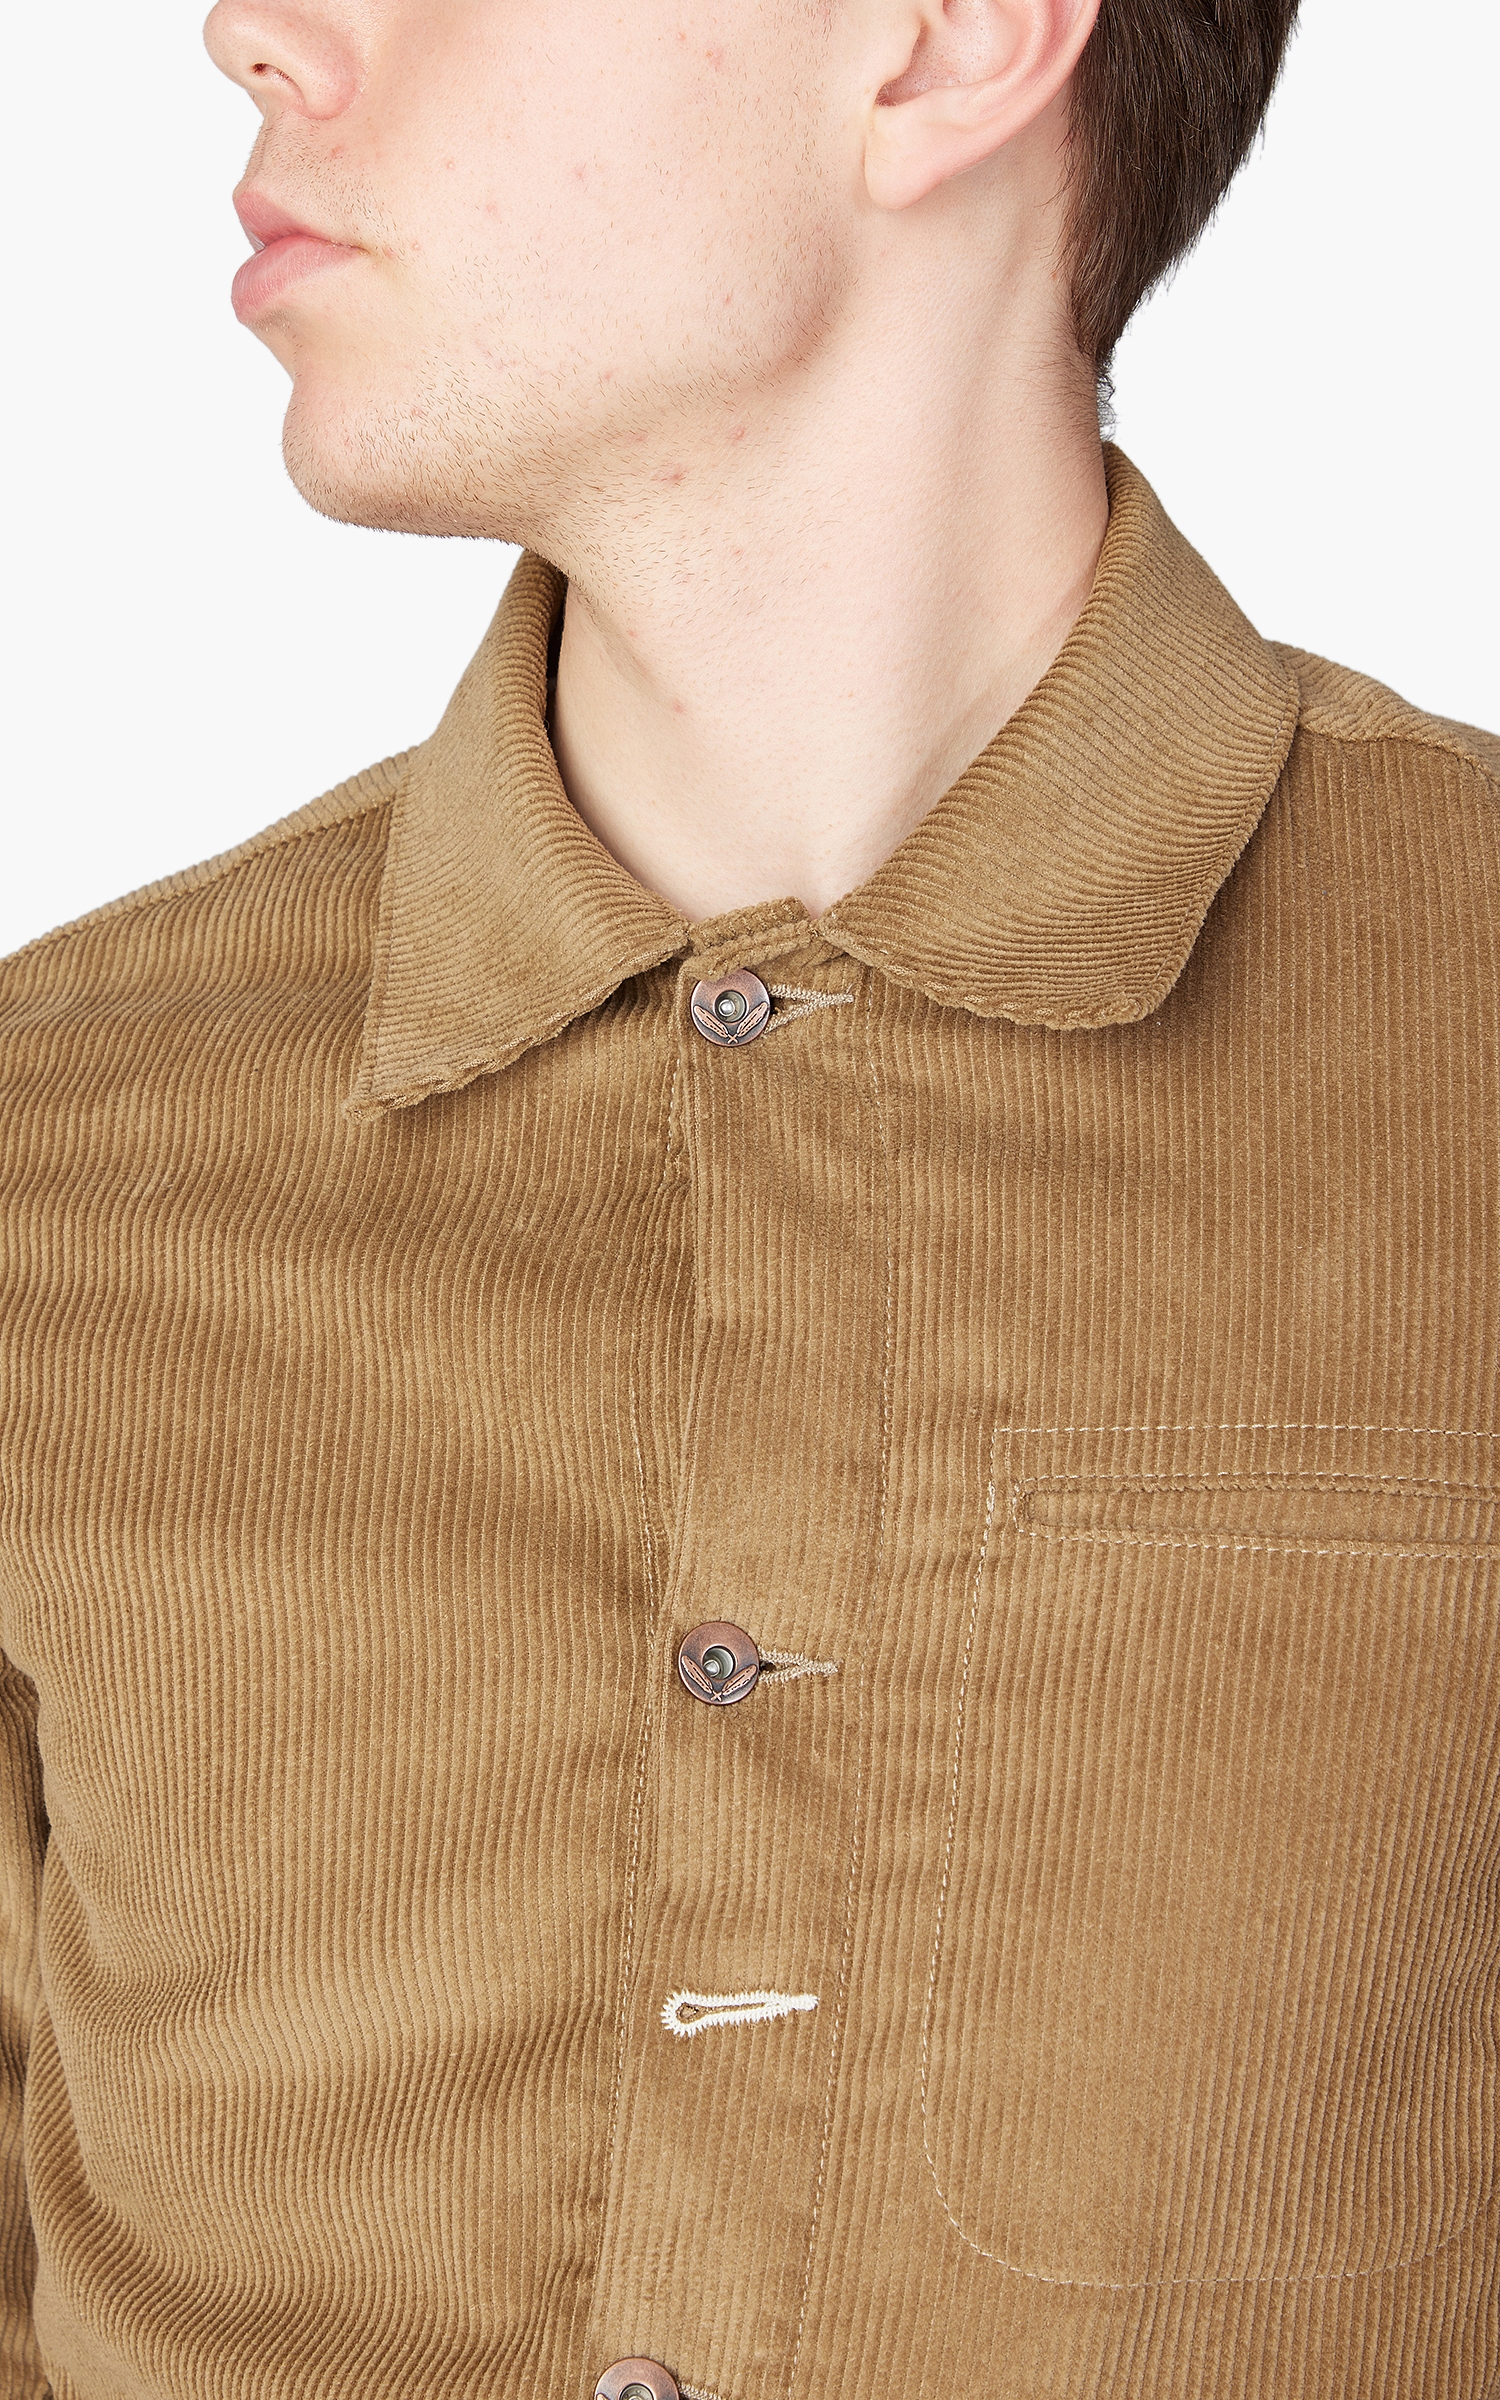 Rogue Territory Supply Jacket Tan Corduroy Lined | Cultizm